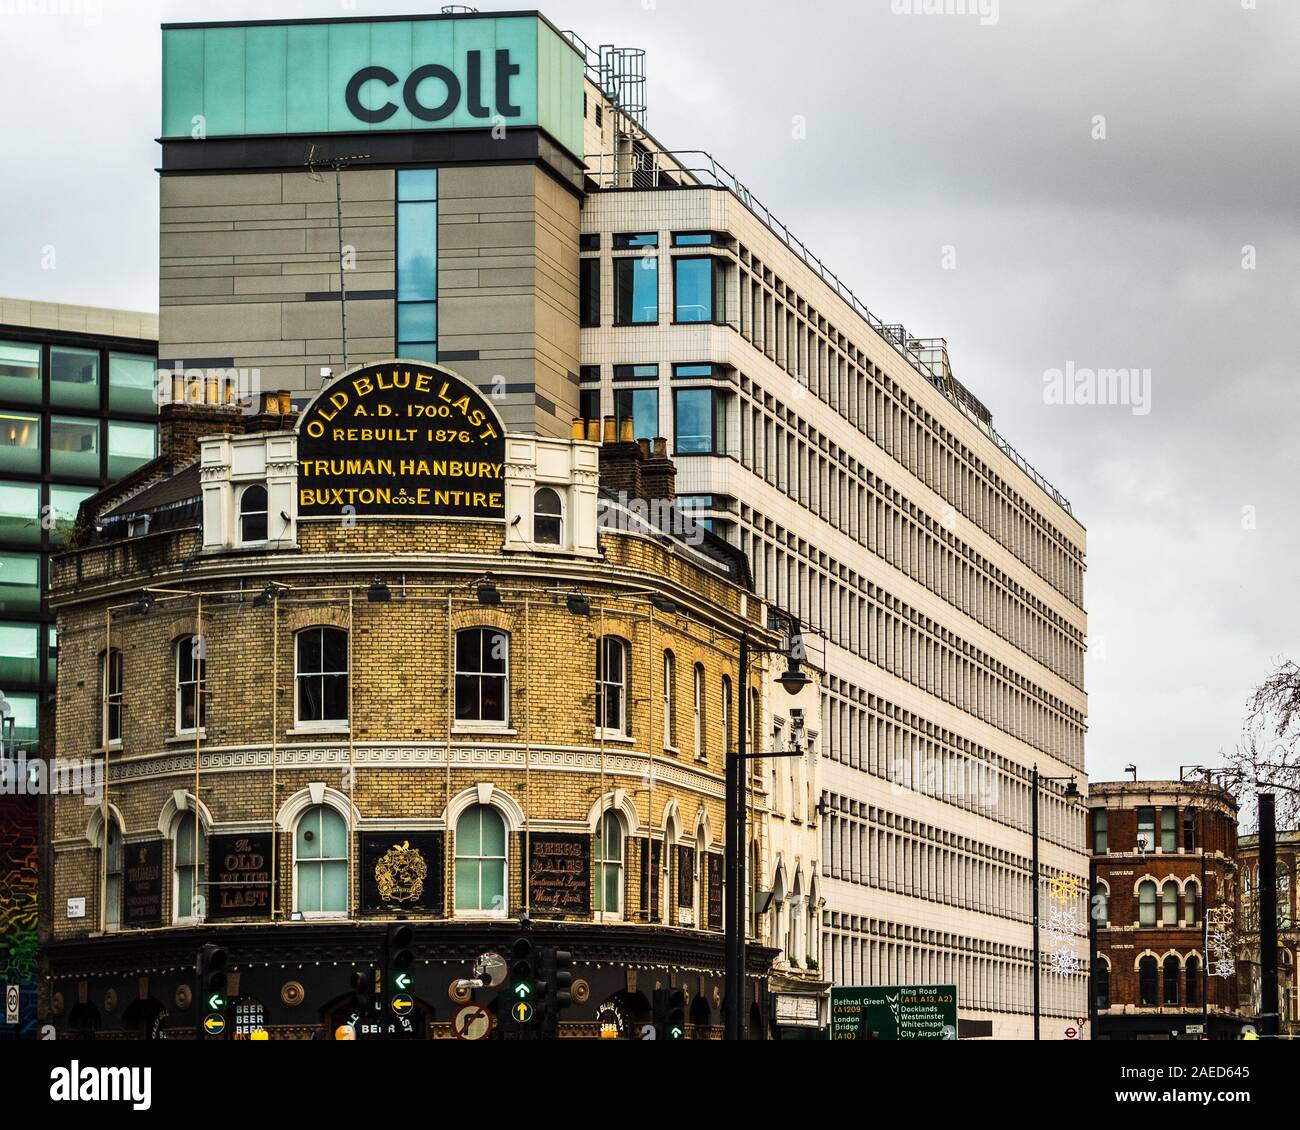 Colt Technology Services Group Limited Head Office Great Eastern Street London. Colt is a multinational telecommunications company with HQ in London. Stock Photo